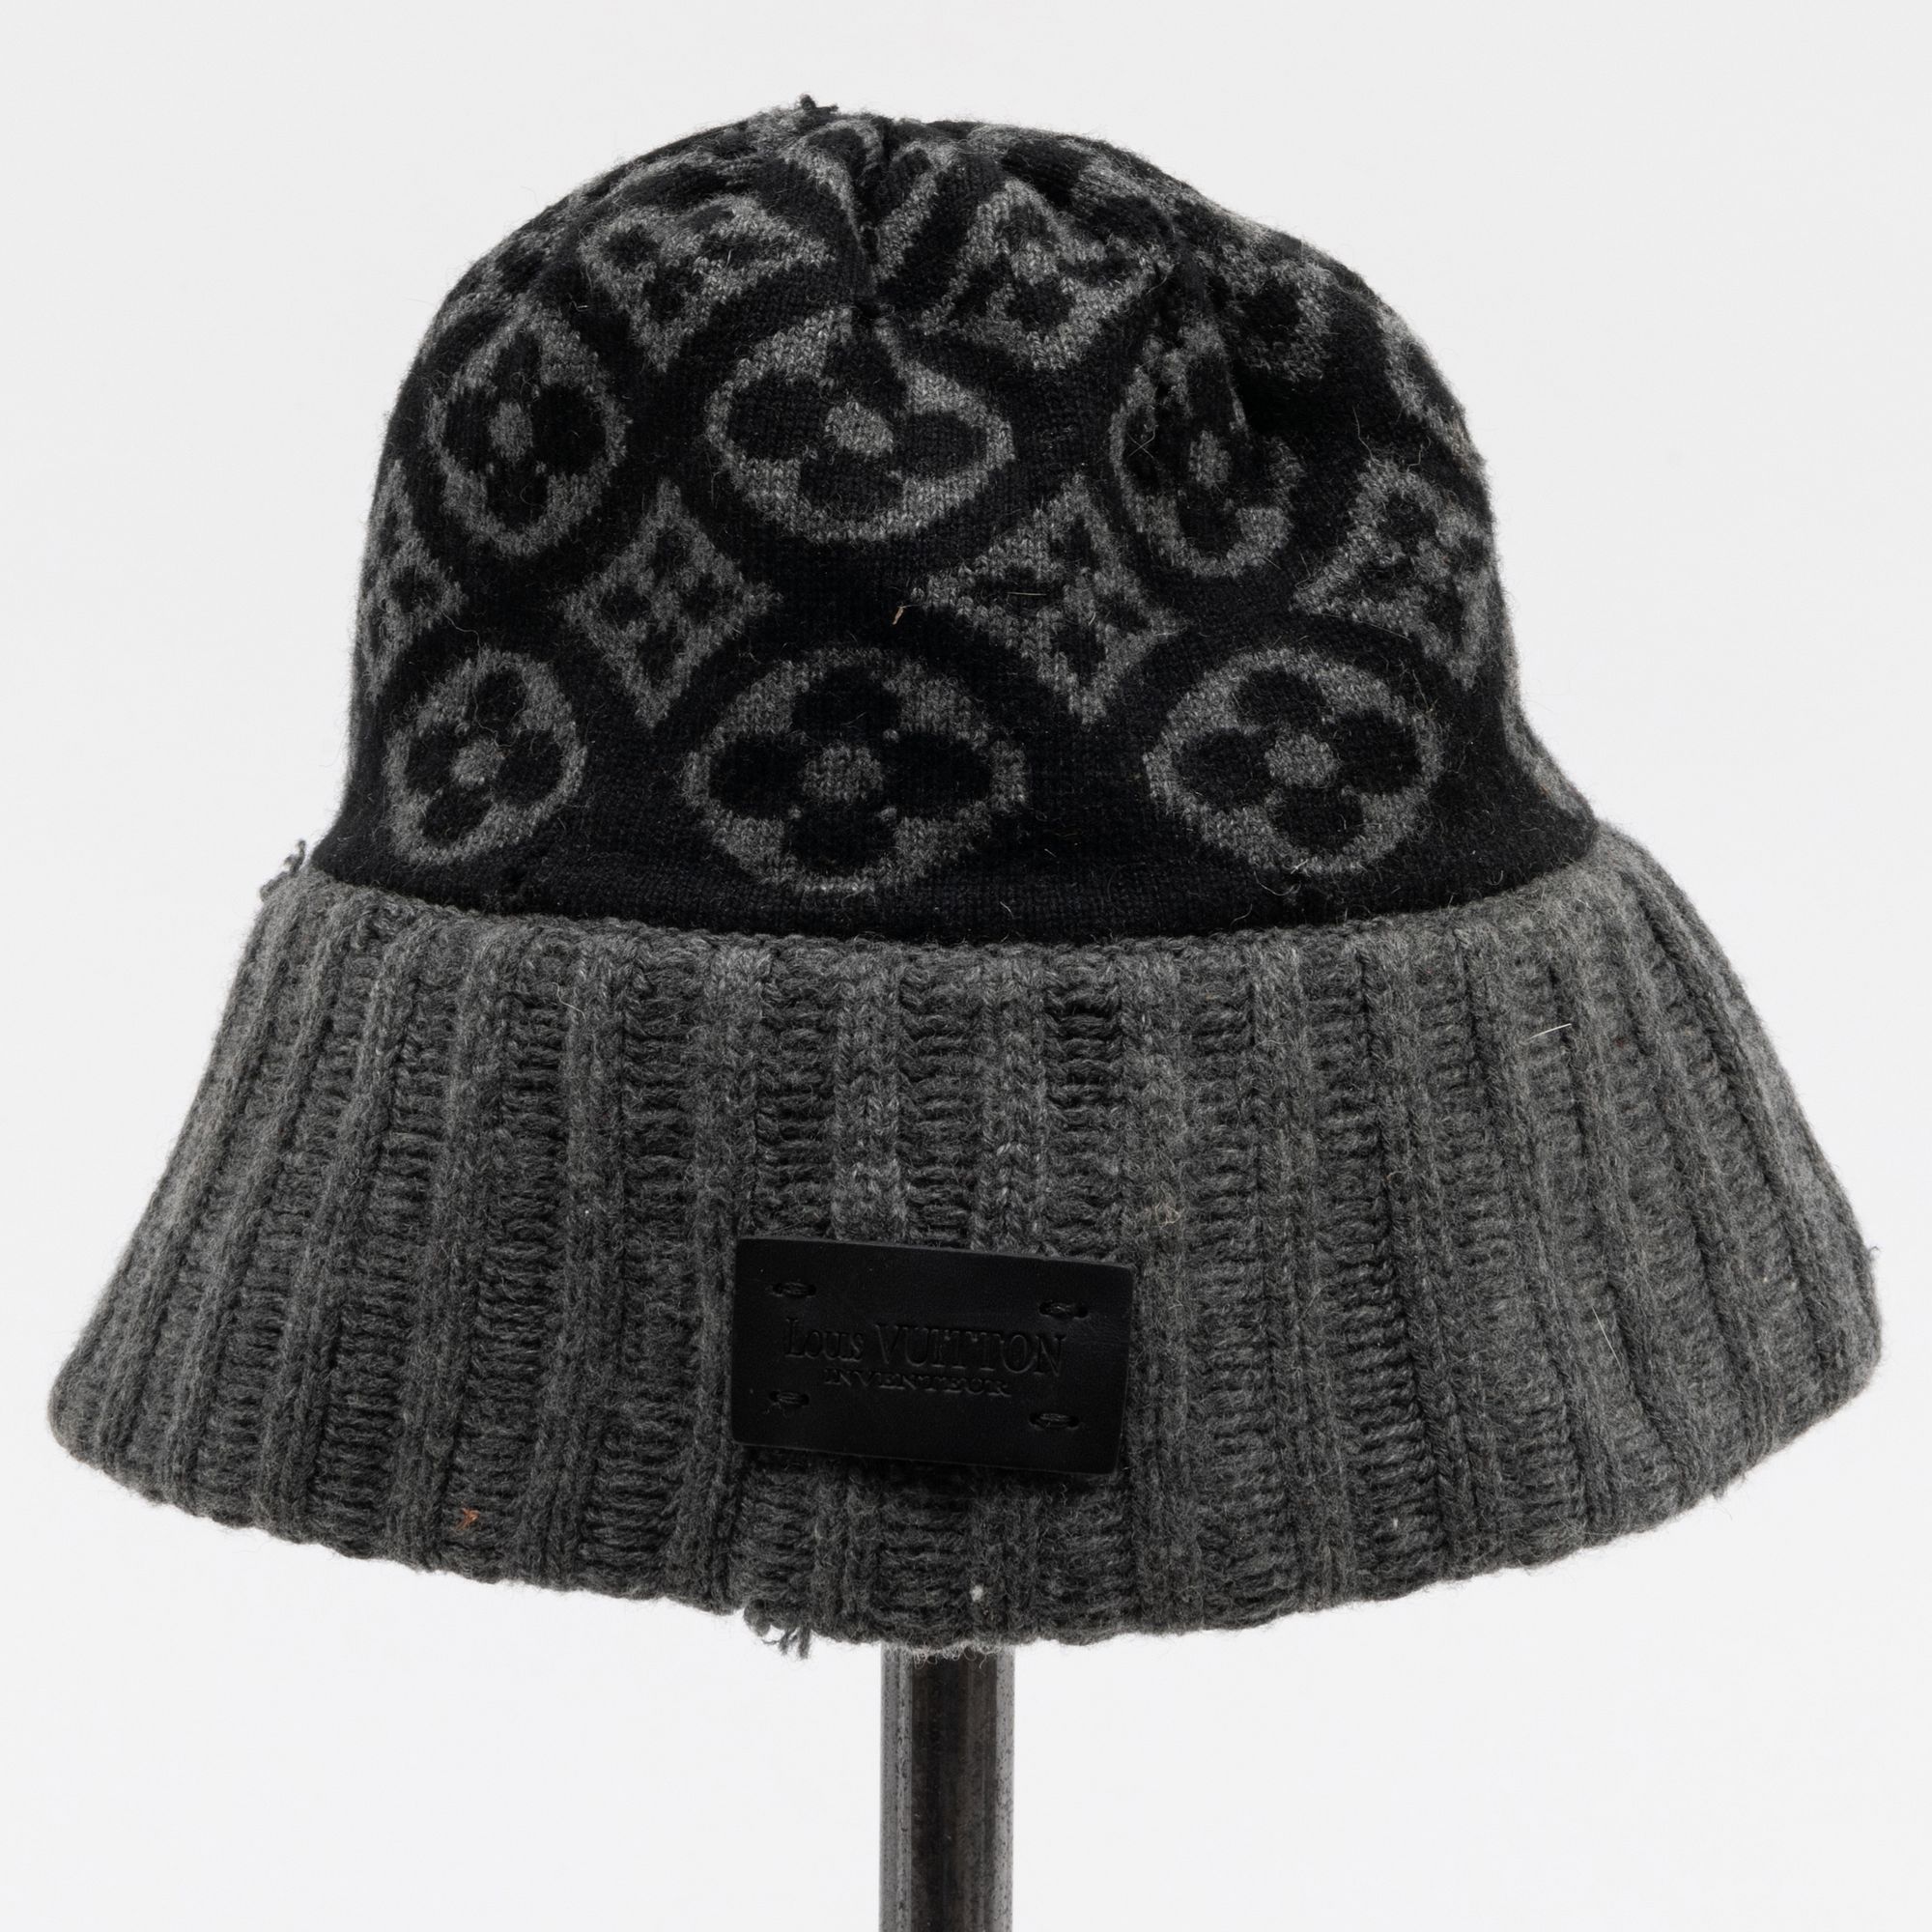 Louis Vuitton Grey Cashmere Knit Hat sold at auction on 21st September